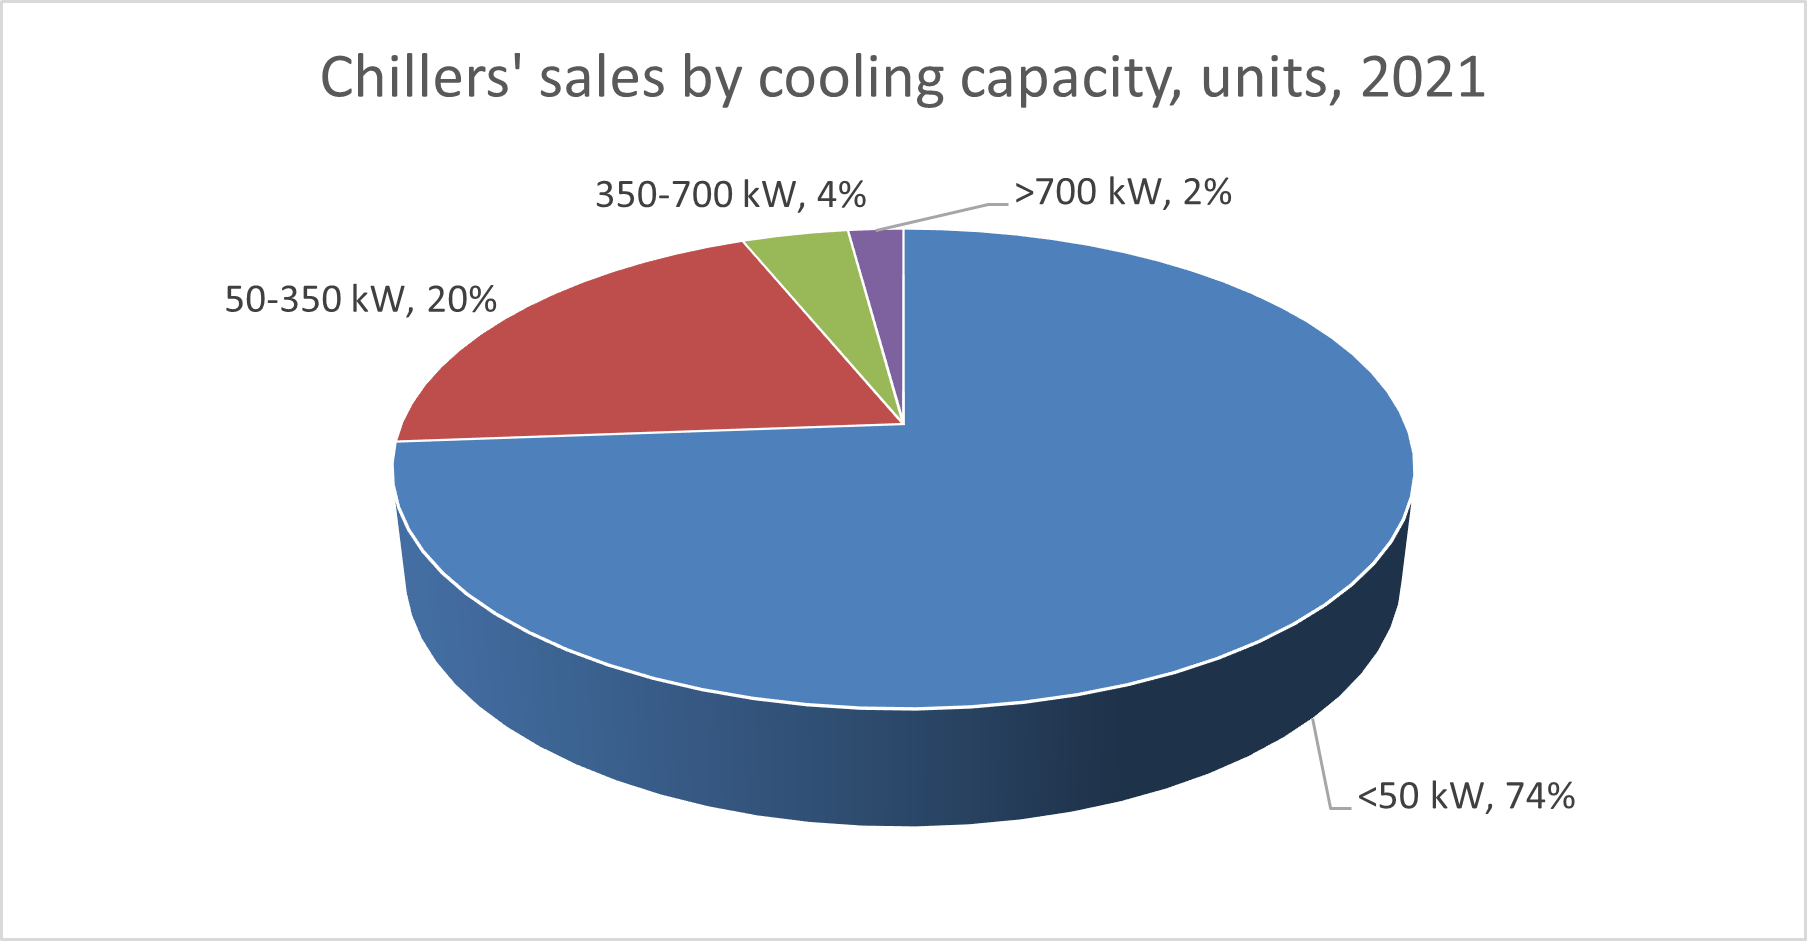 Chiller sales by cooling capacity (percentage of units), EU 28 – 2021, from Eurovent Market intelligence